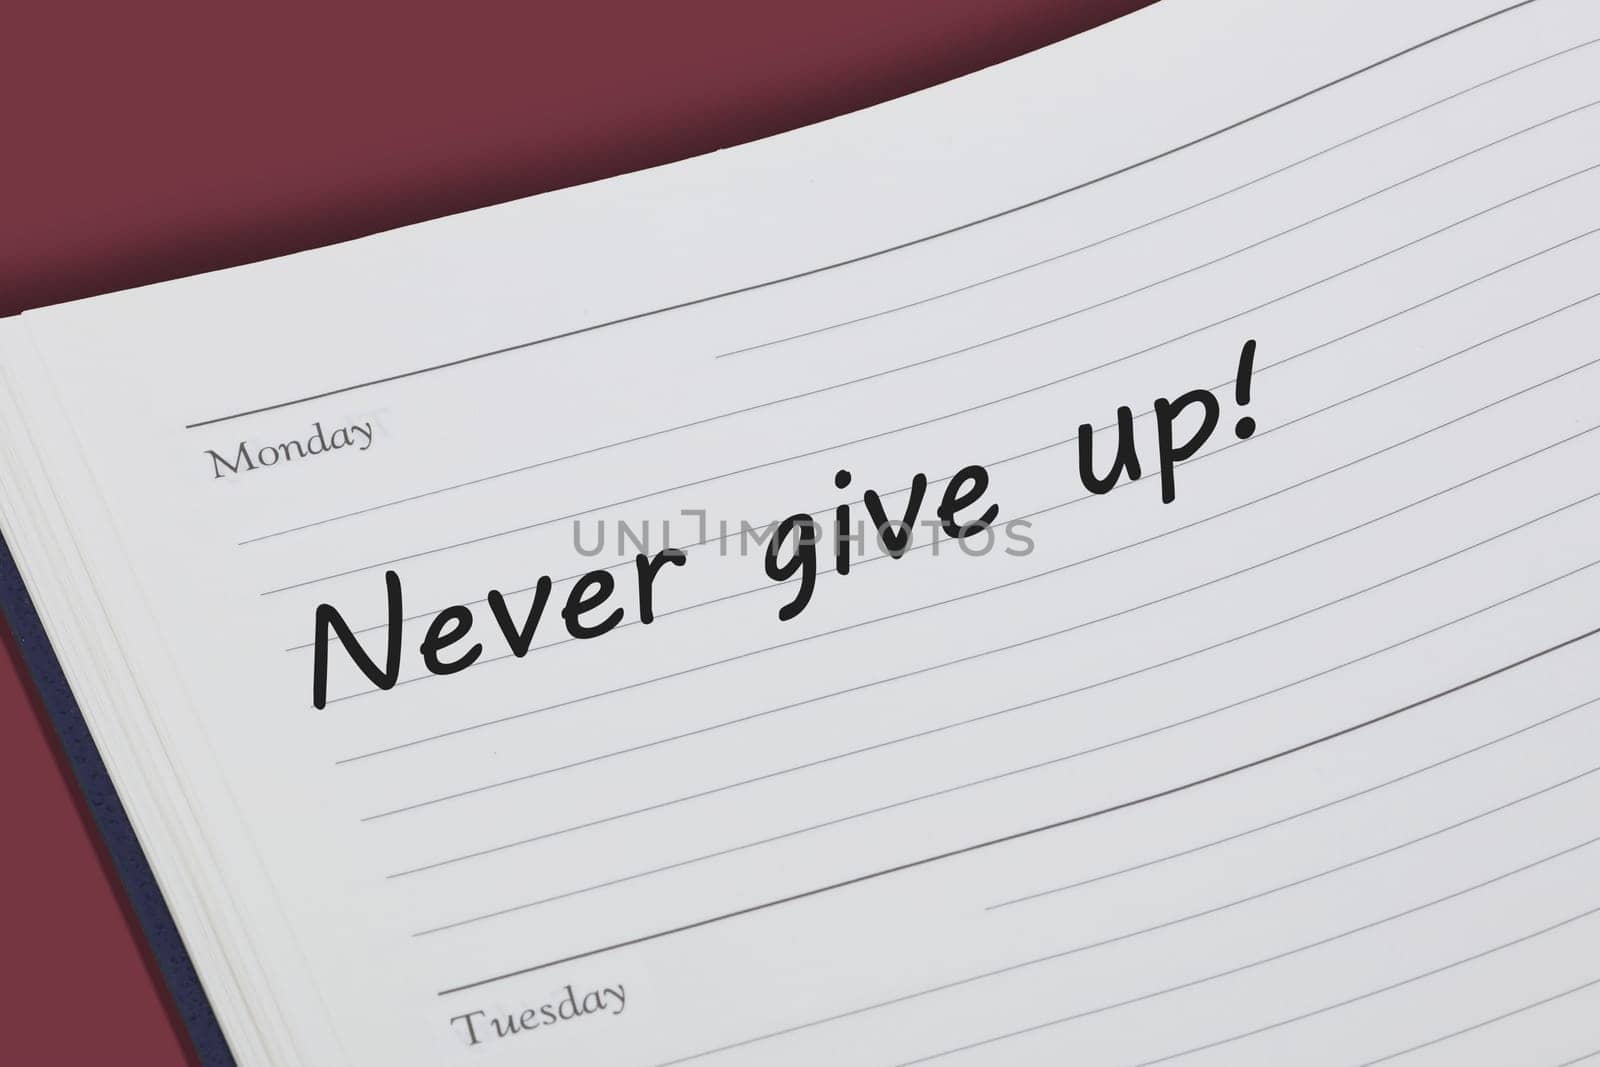 Never give up reminder message in an open diary by VivacityImages